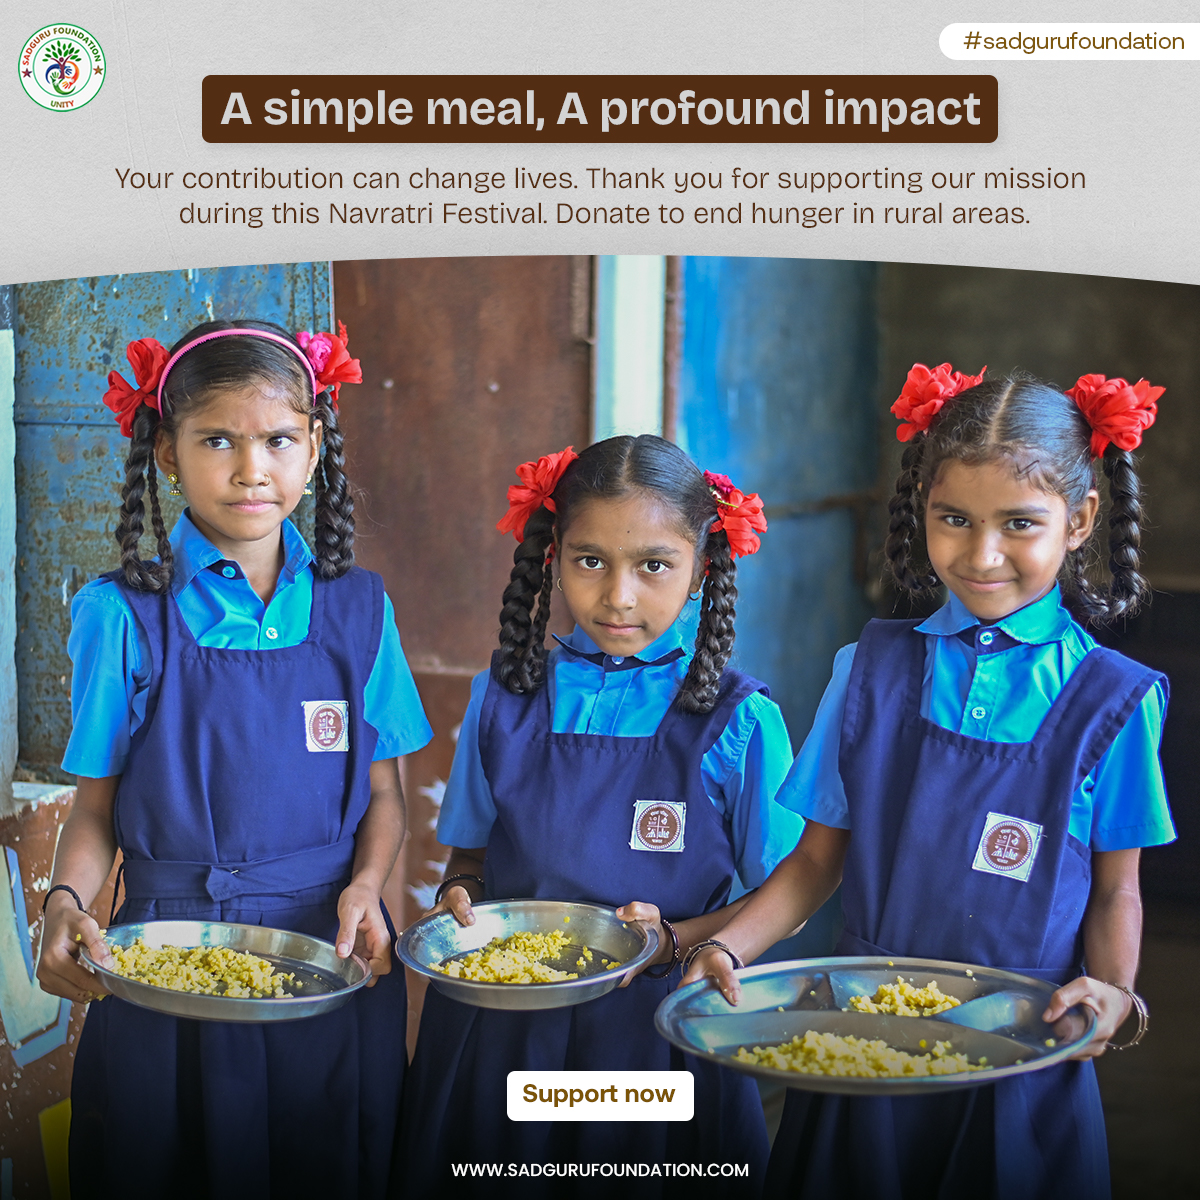 Your support fuels our mission to bring joy through nourishment.
Donate Now for a noble cause.
.
.
.
#sadgurufoundation #poor #kids #feed #meal #middaymeal #rural #life #village #remotearea #help #donate #ngo #Navratri